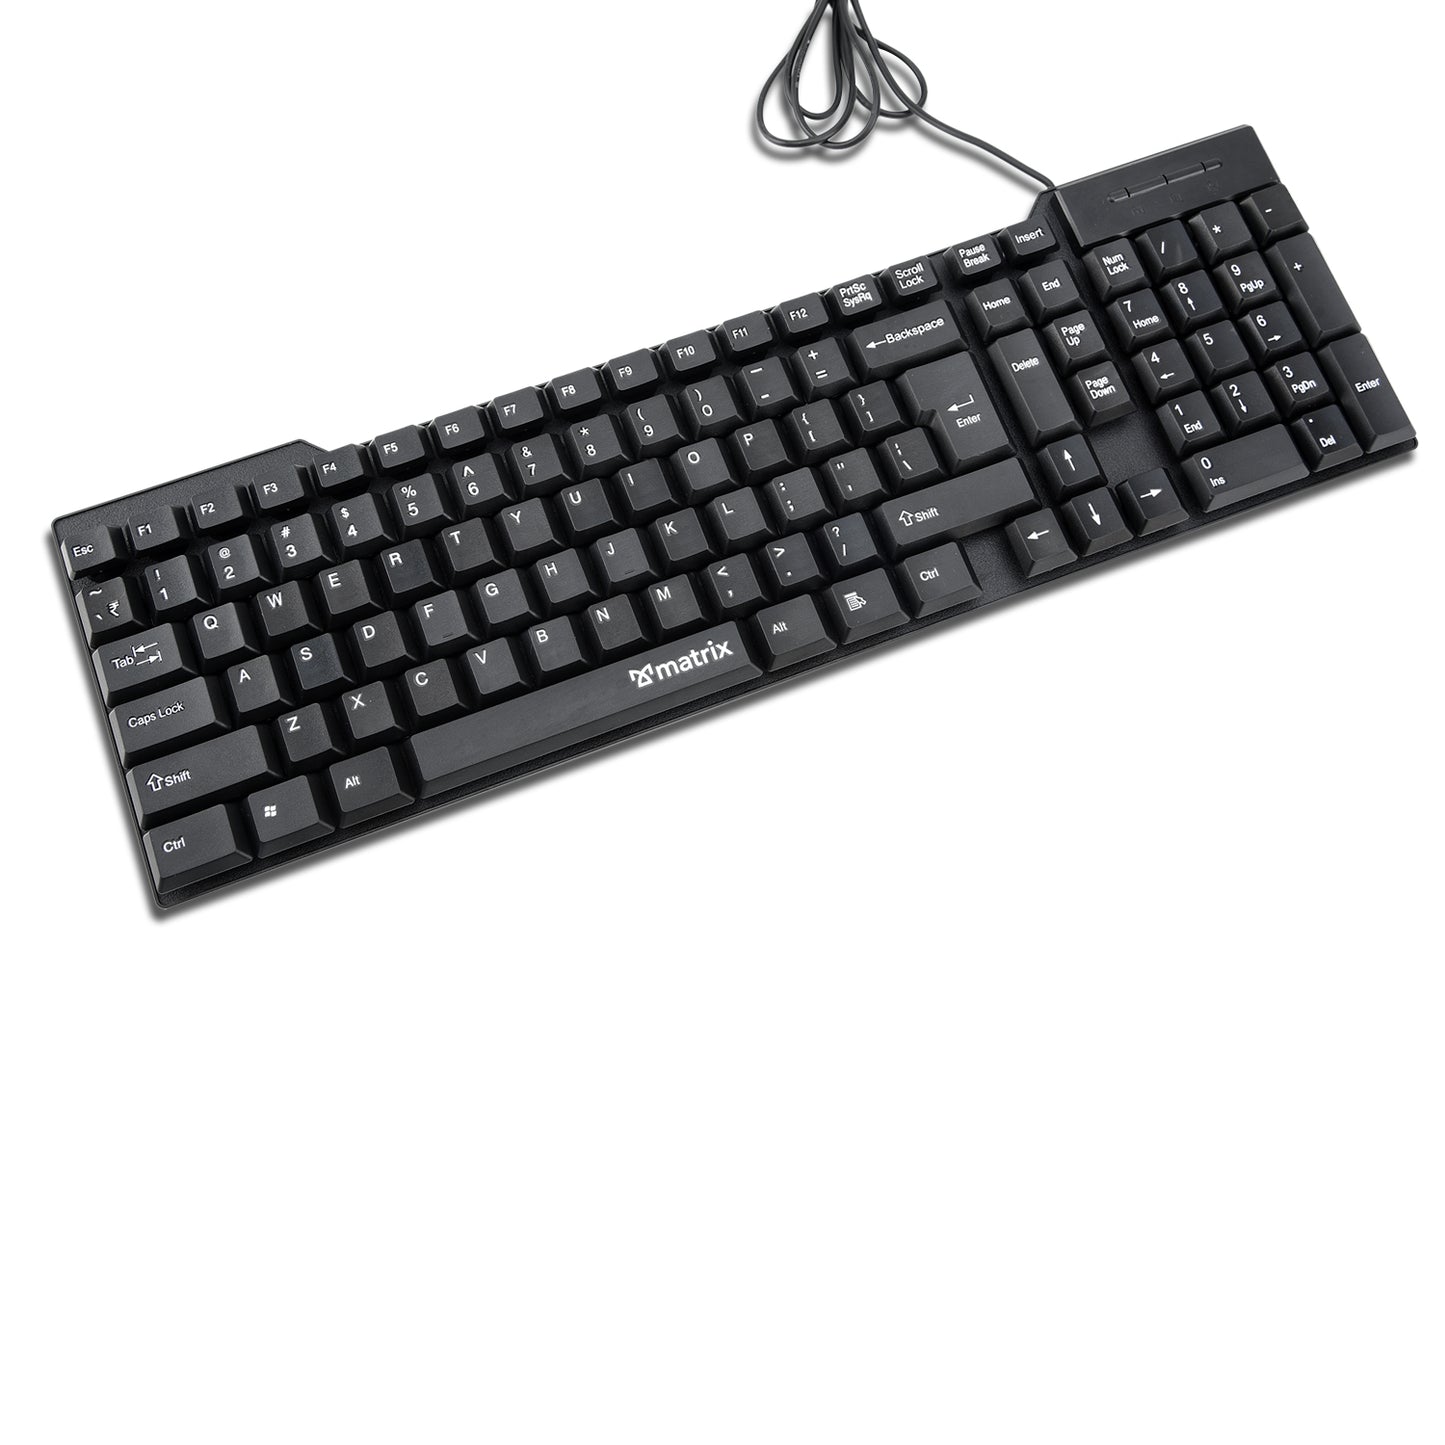 WIRED KEYBOARD AND MOUSE COMBO